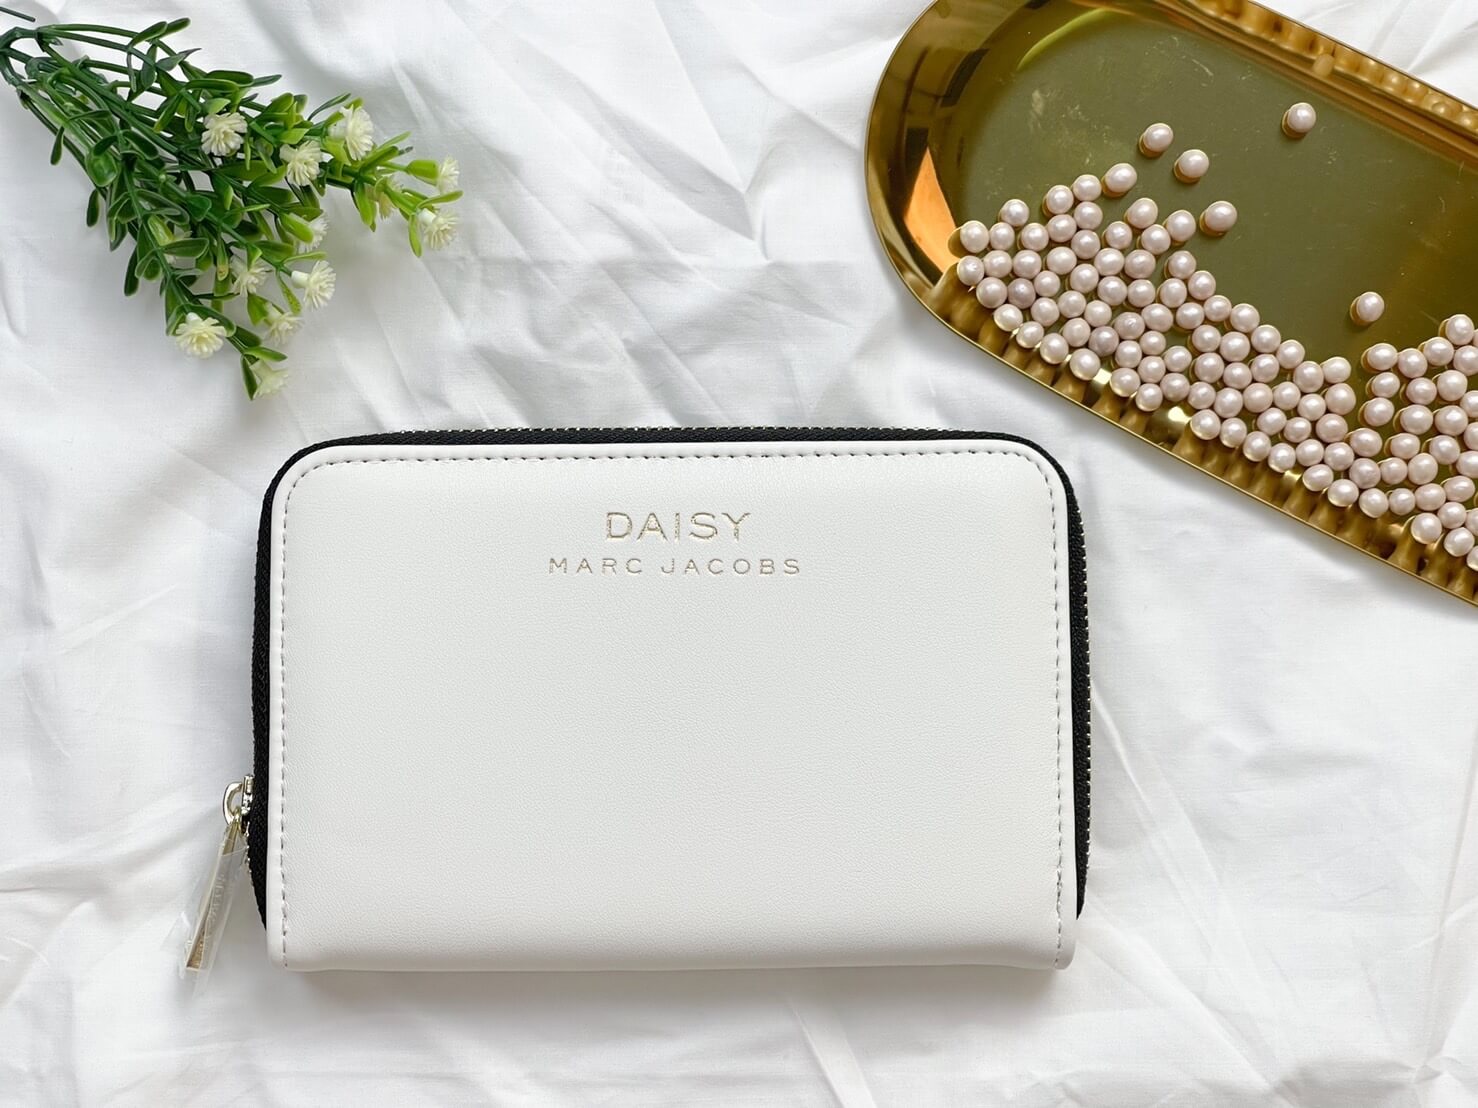 MARC JACOBS Daisy Pouch